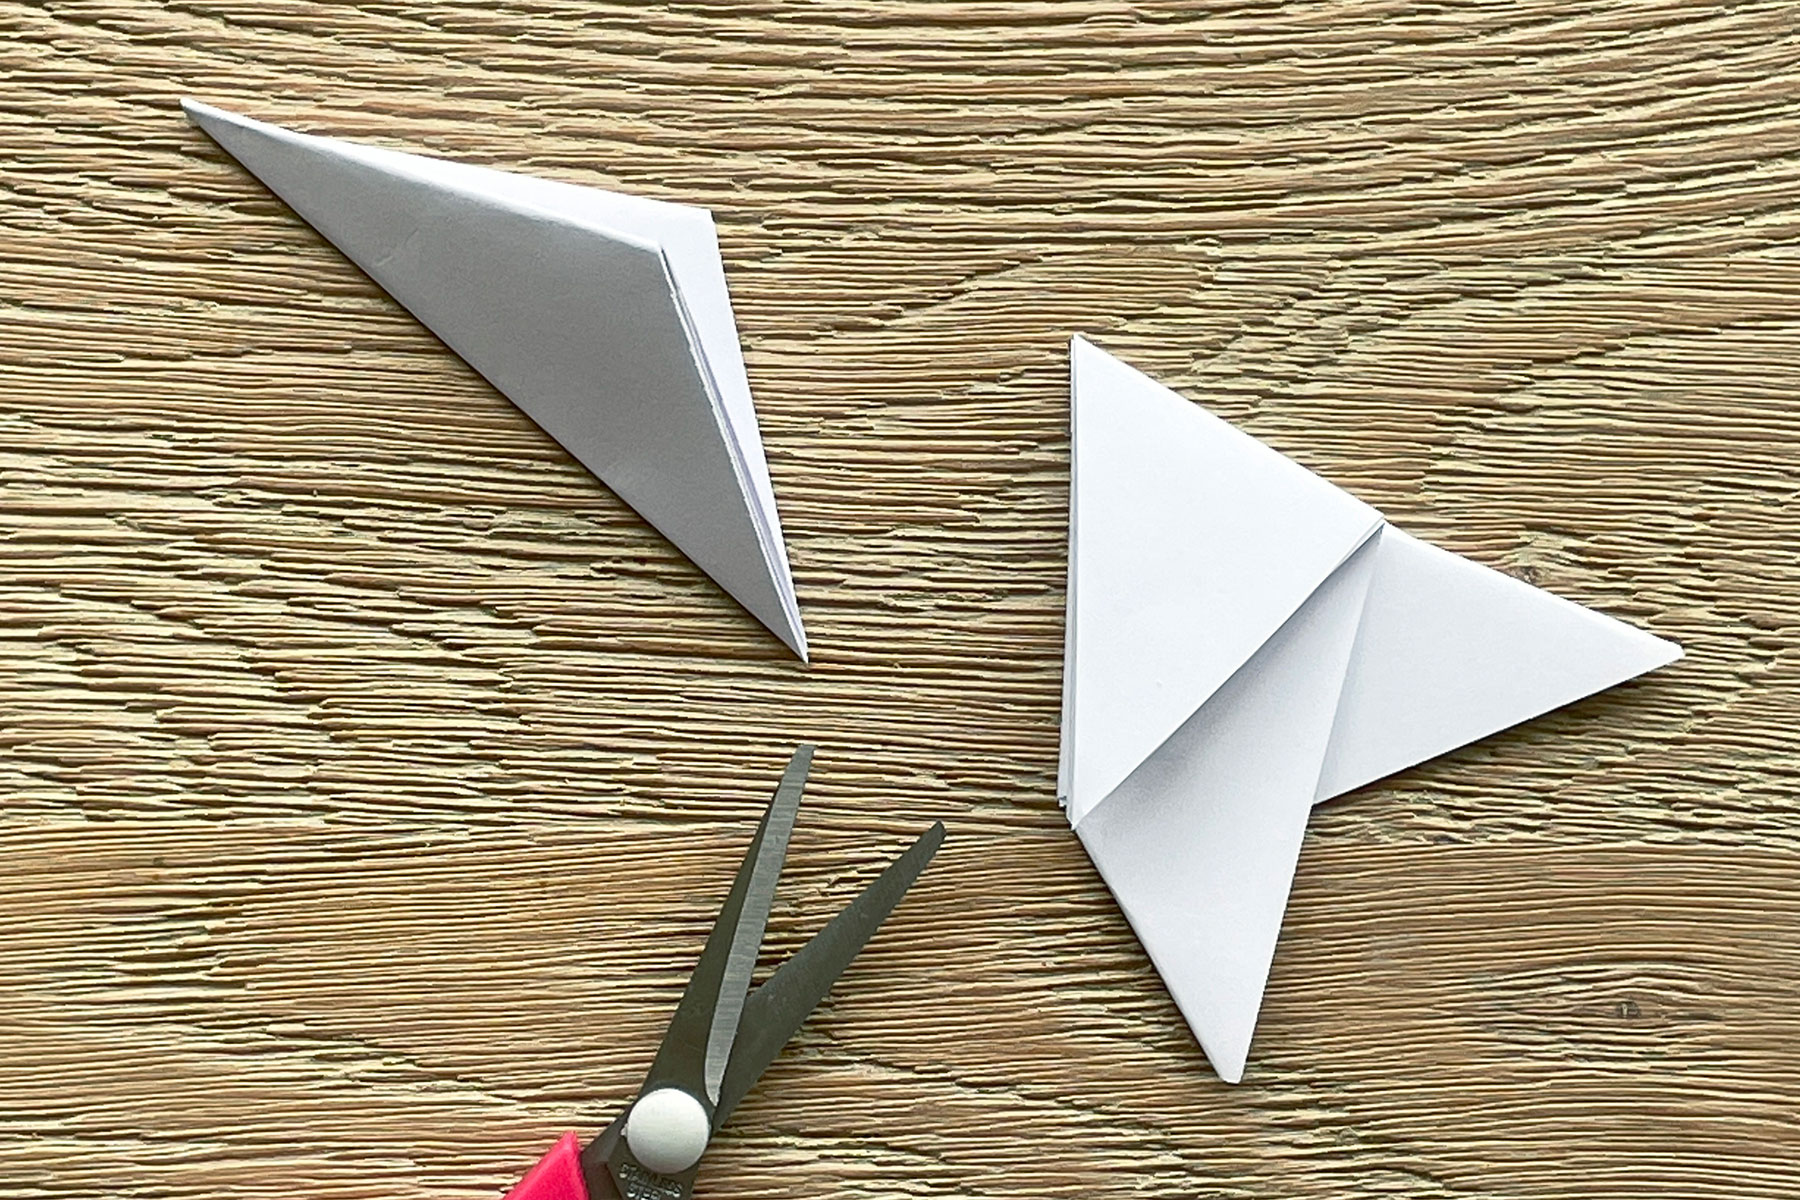 A photo of the folded triangle piece of paper having its bottom cut off